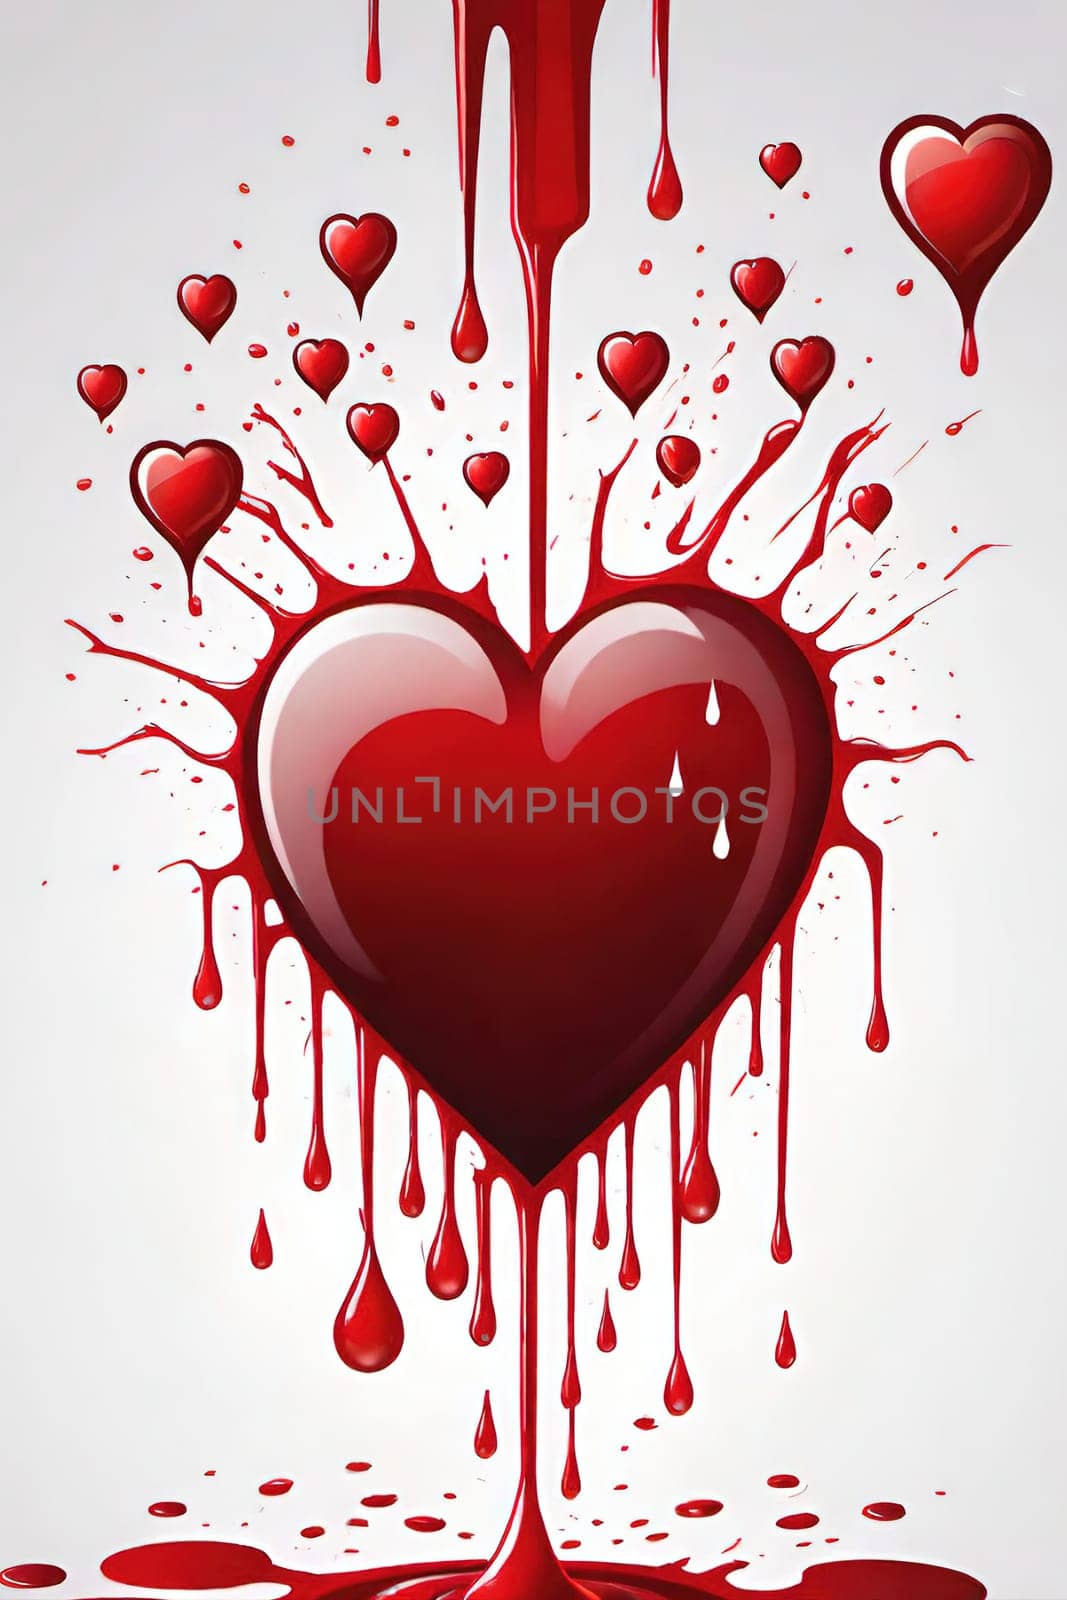 Heart with blood splashes on a gray background. Heart health concept.Heart and drops of blood.Heart and blood splatter on  background.